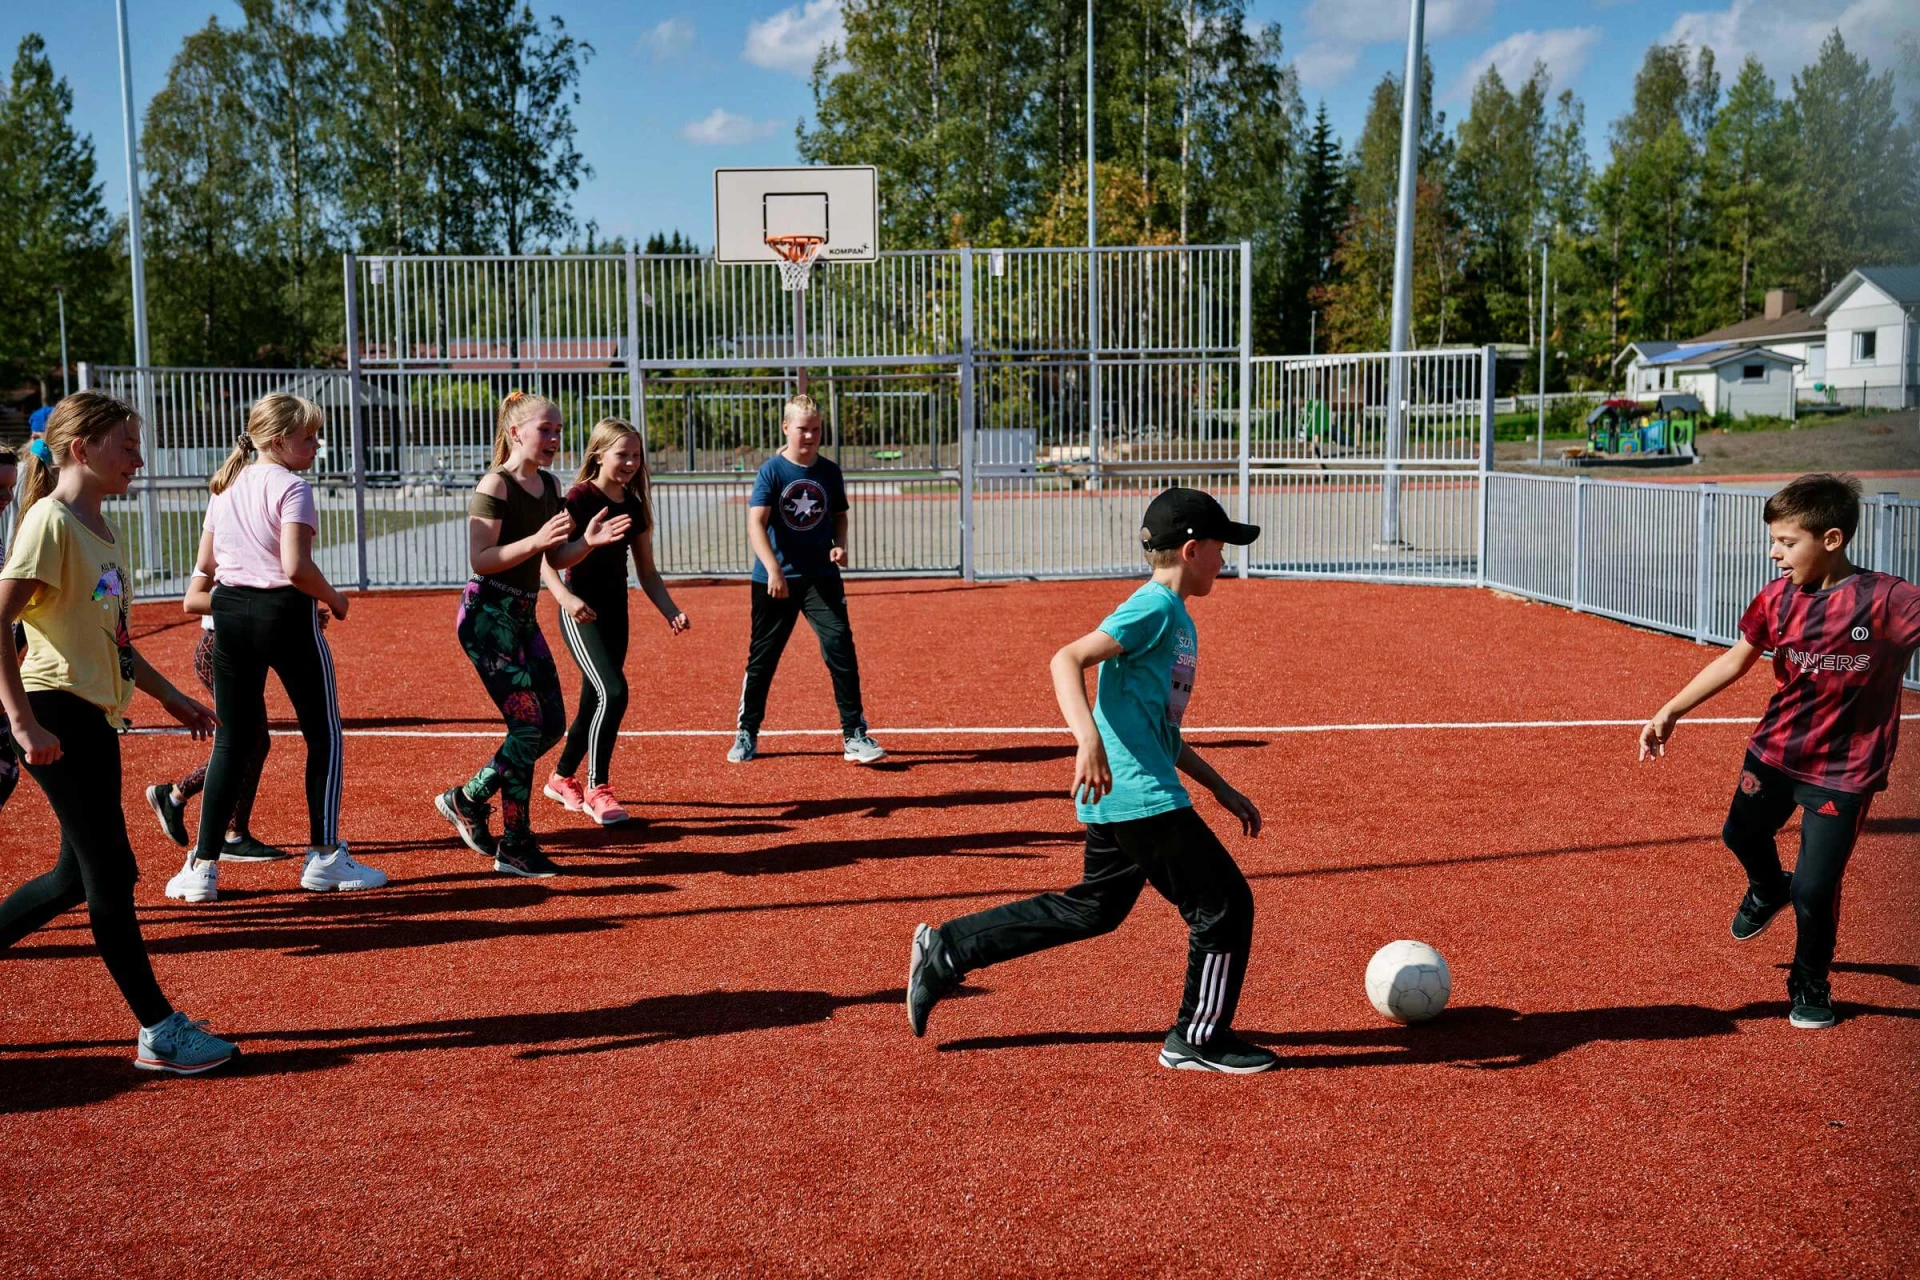 Kids playing soccer on an outdoor multisport court